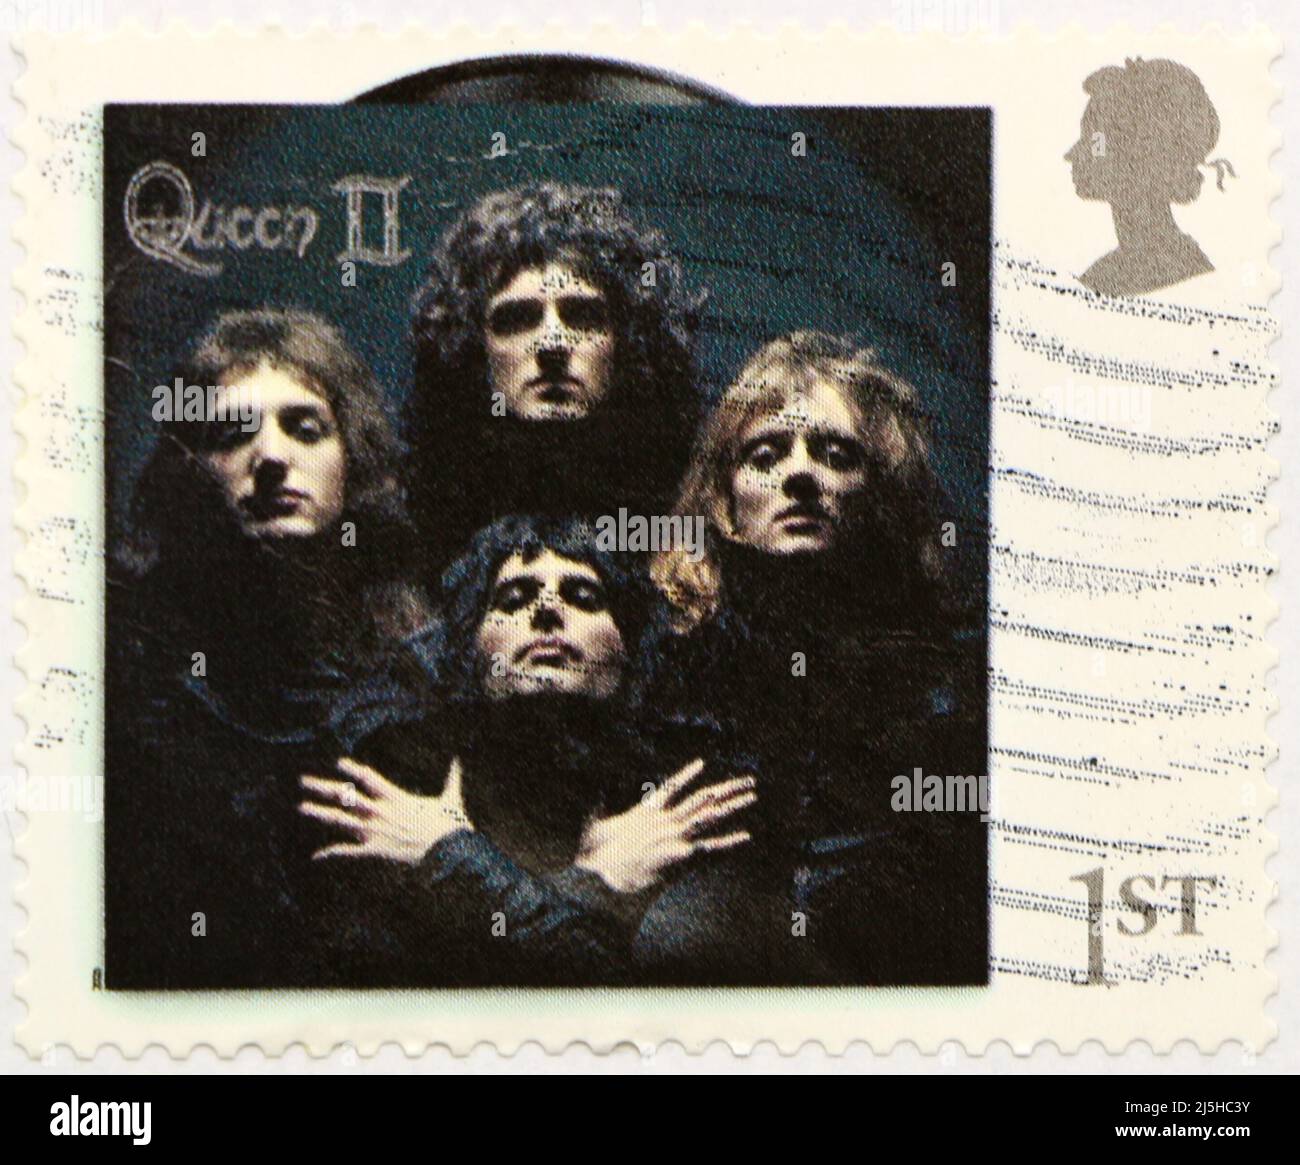 Photo of a British postage stamp with the cover of the album Queen II commemorating the rock band 2020 Stock Photo